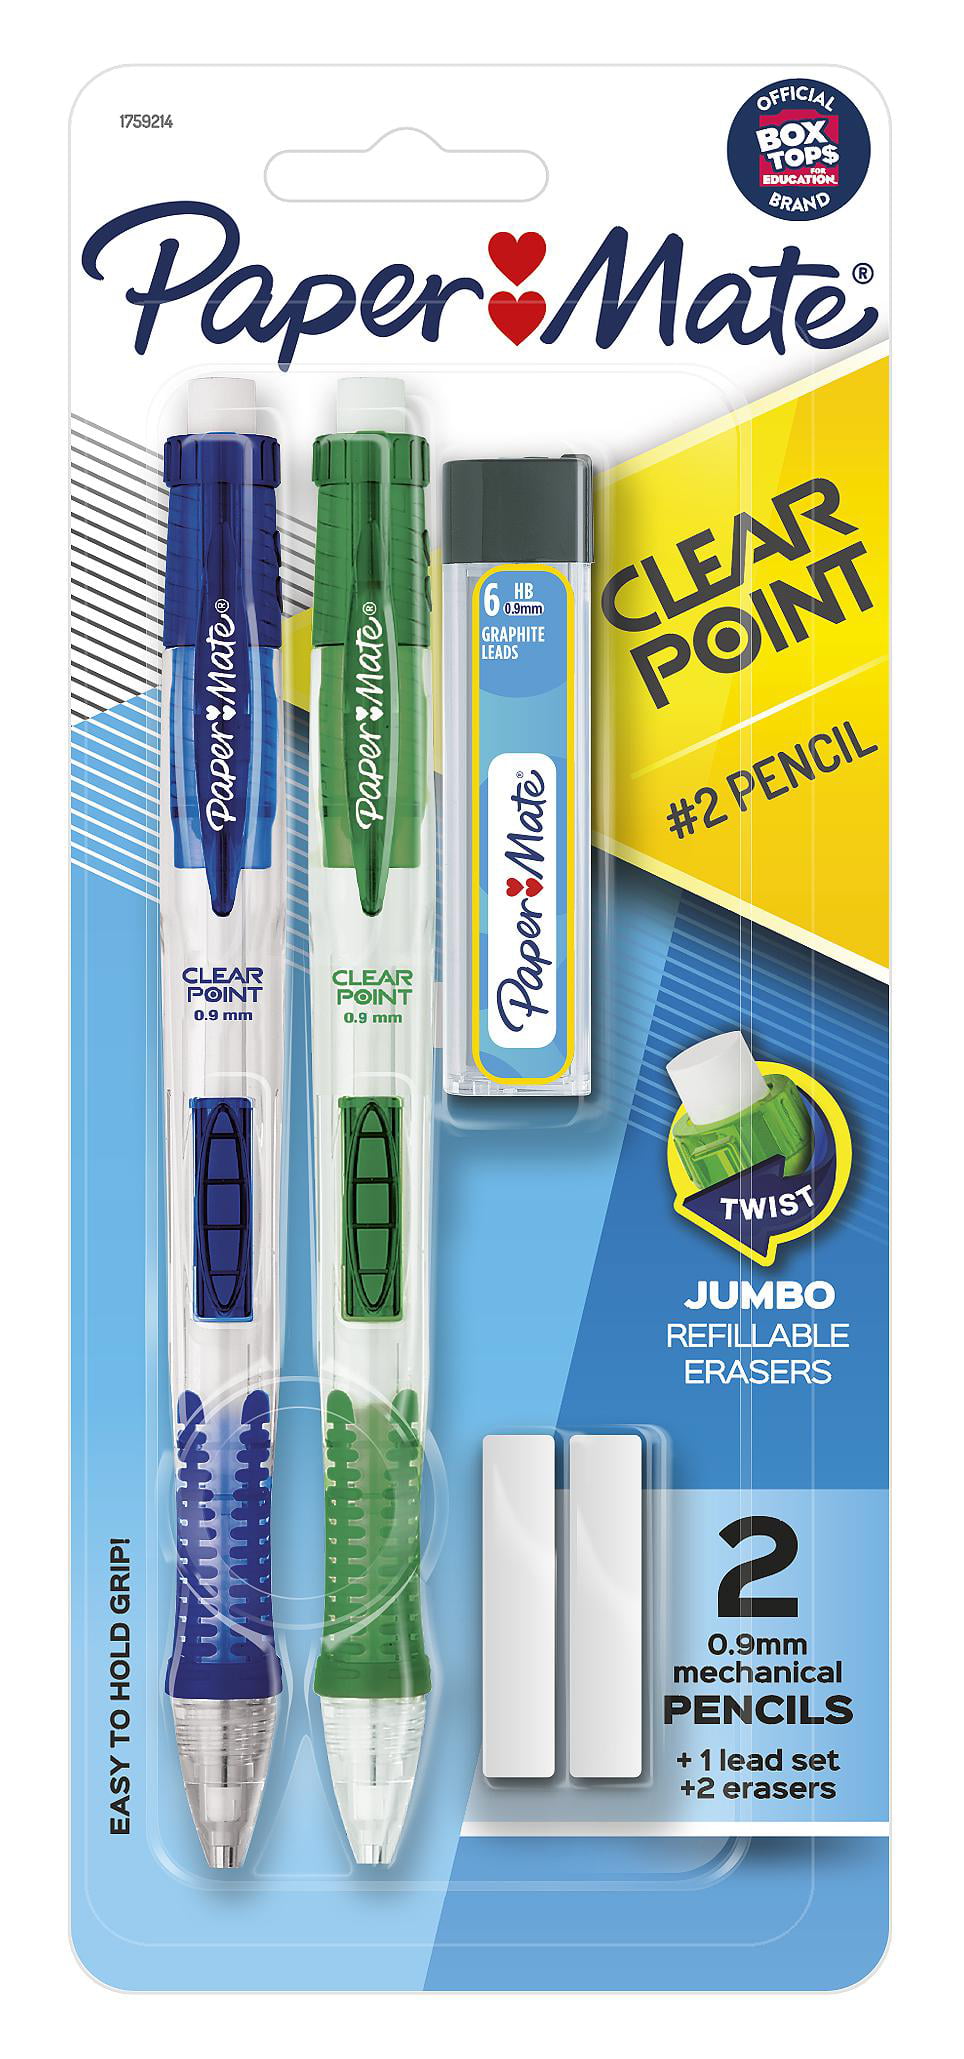 Paper Mate Clearpoint Mechanical Pencil, 0.9 mm, pk of 2